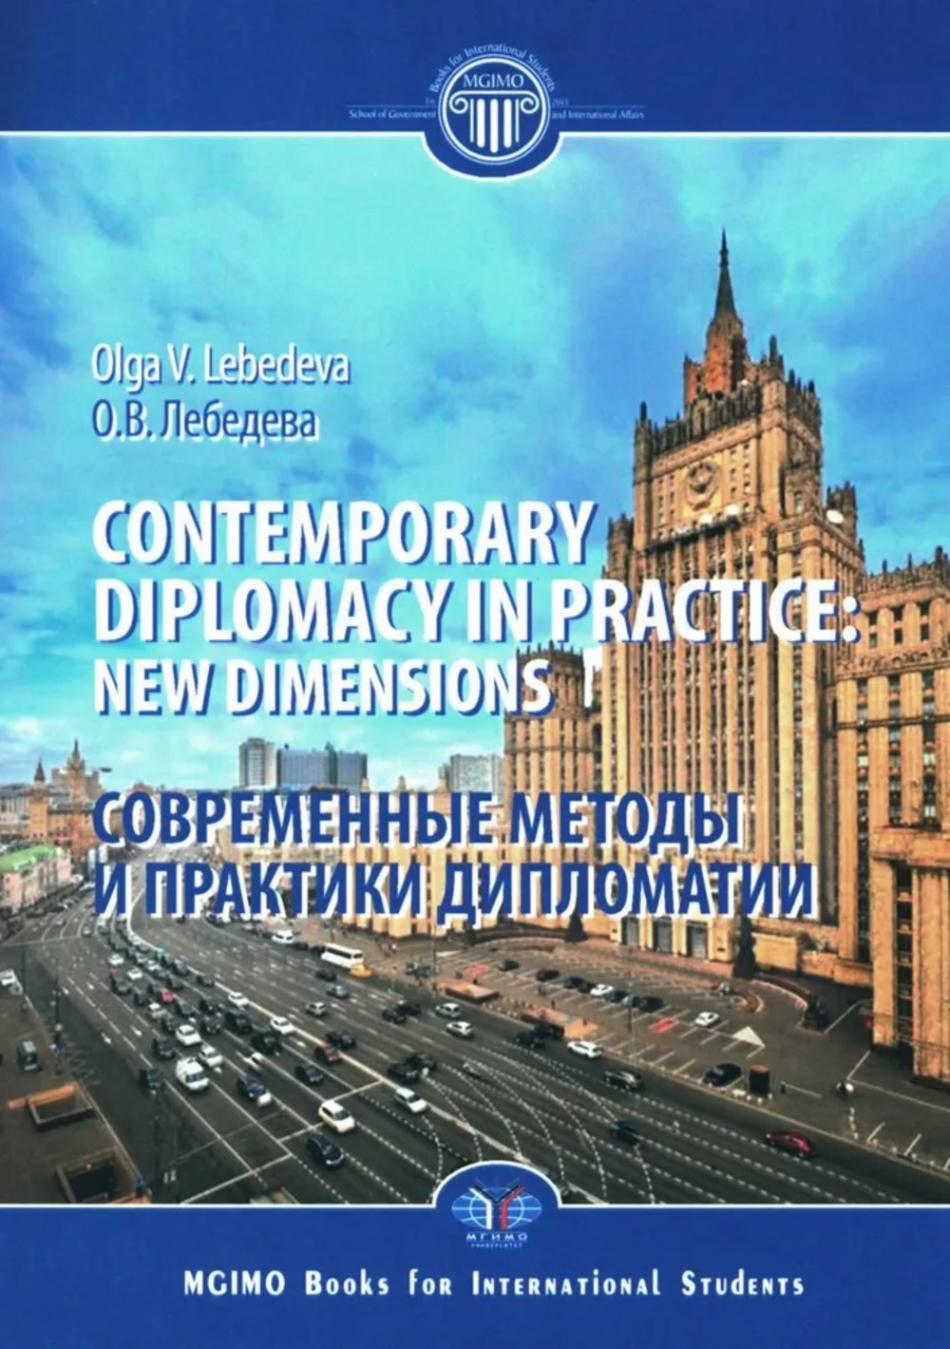  .. Contemporary diplomacy in practice: new dimensions =      